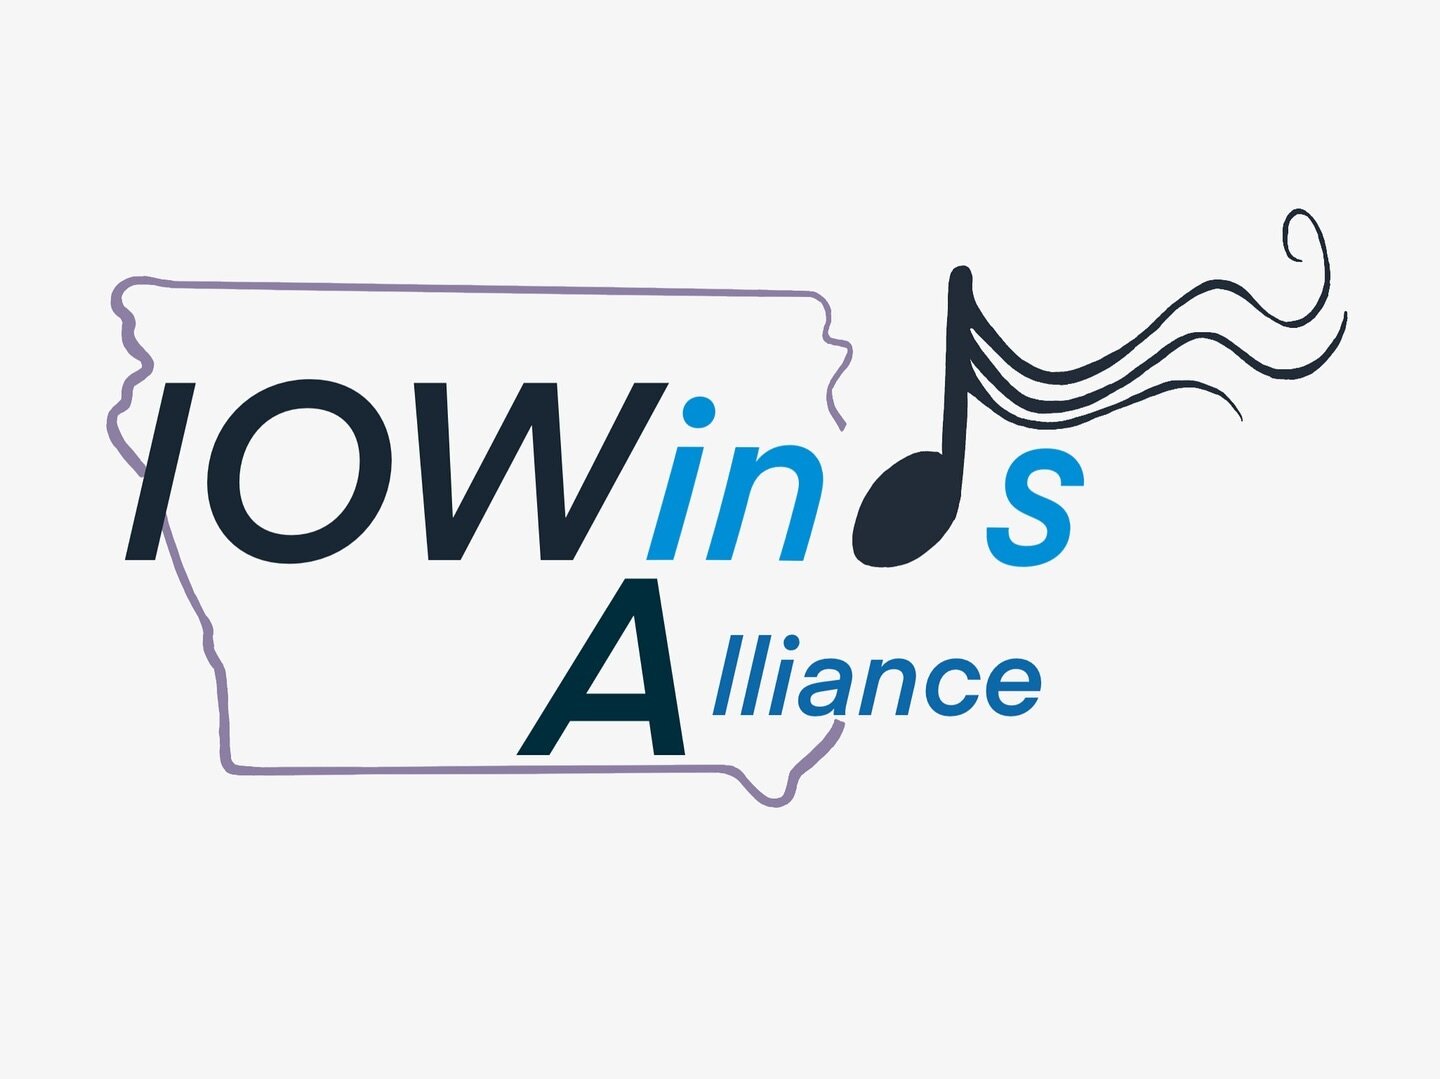 Please support IOWinds Alliance, organized for the purpose of educating and inspiring young musicians learning both wind and brass instruments throughout the state of Iowa. Link to our GoFundMe account can be found in the bio. Please follow us on Ins